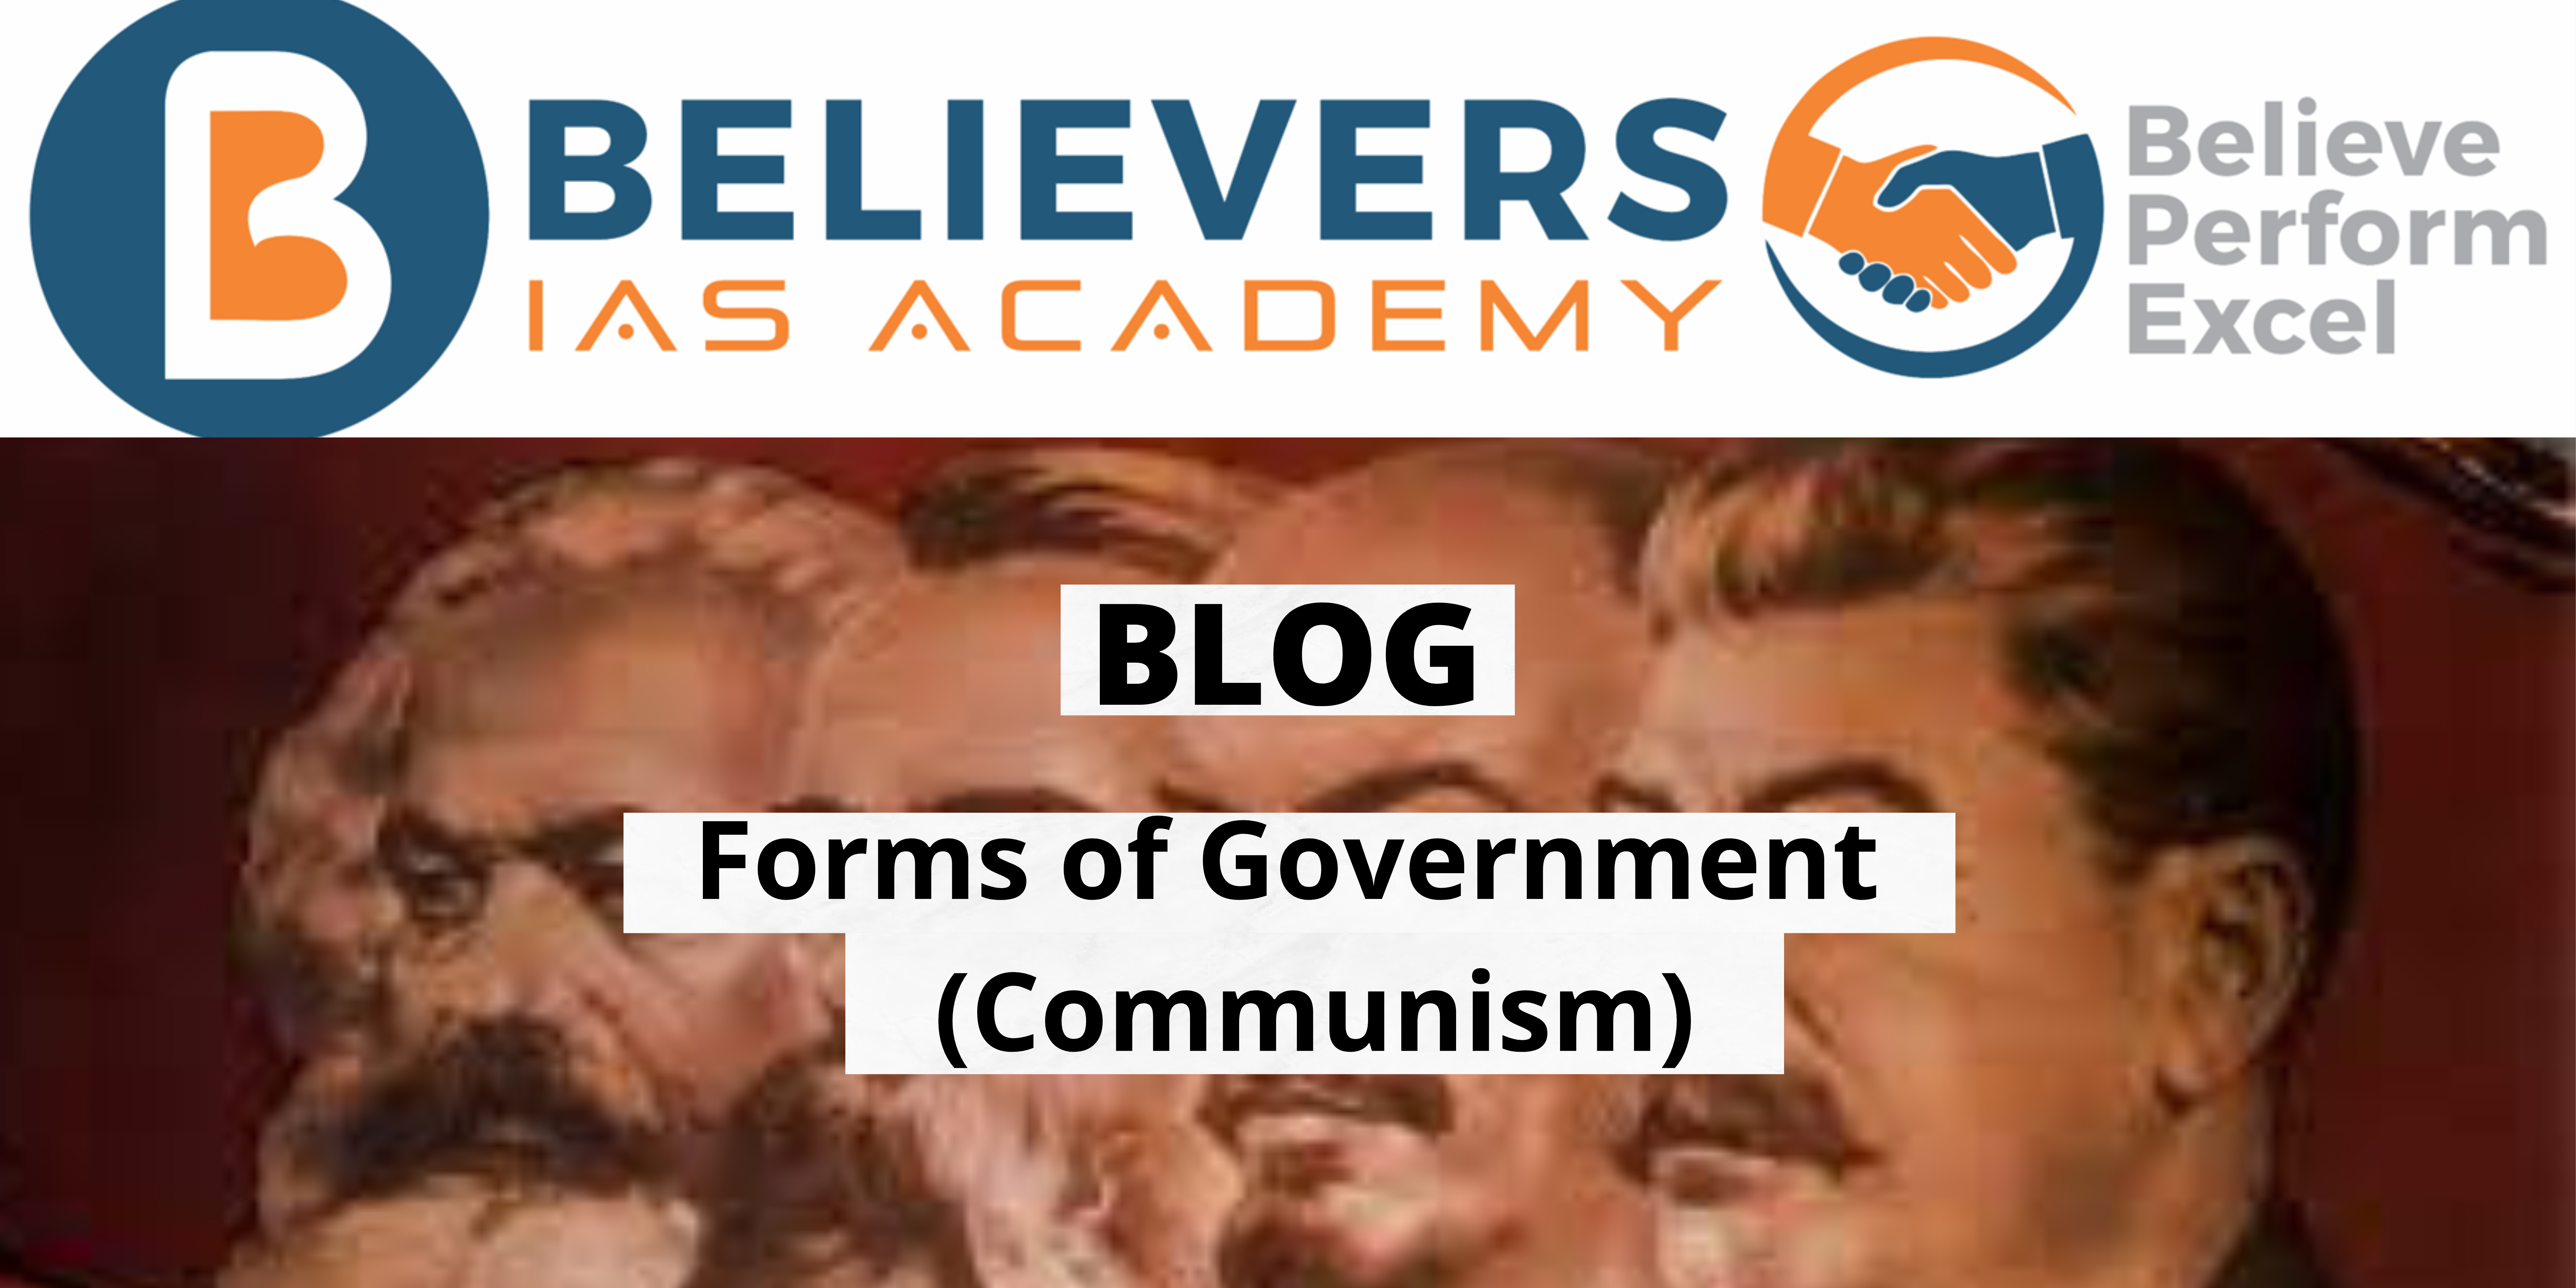 Forms of Government (Communism)